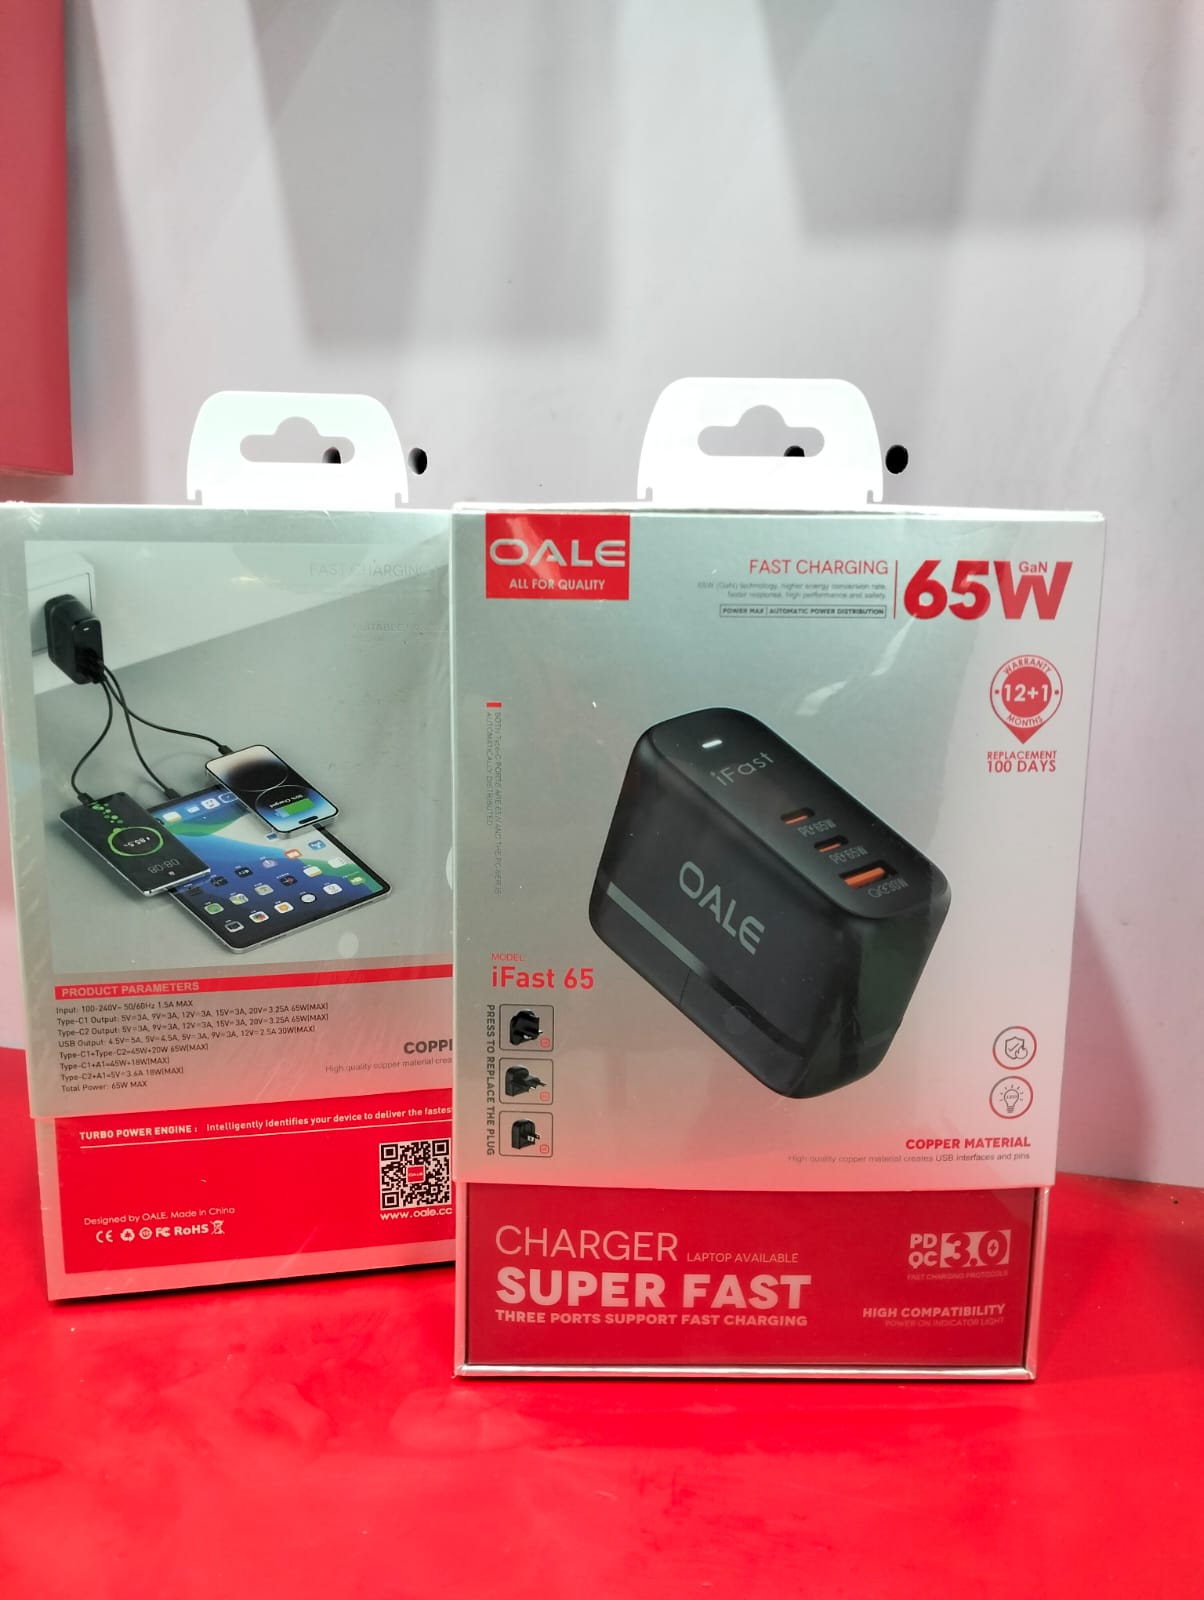 OALE 65W Super Fast Charger for Mobile phone, iPad and laptop.